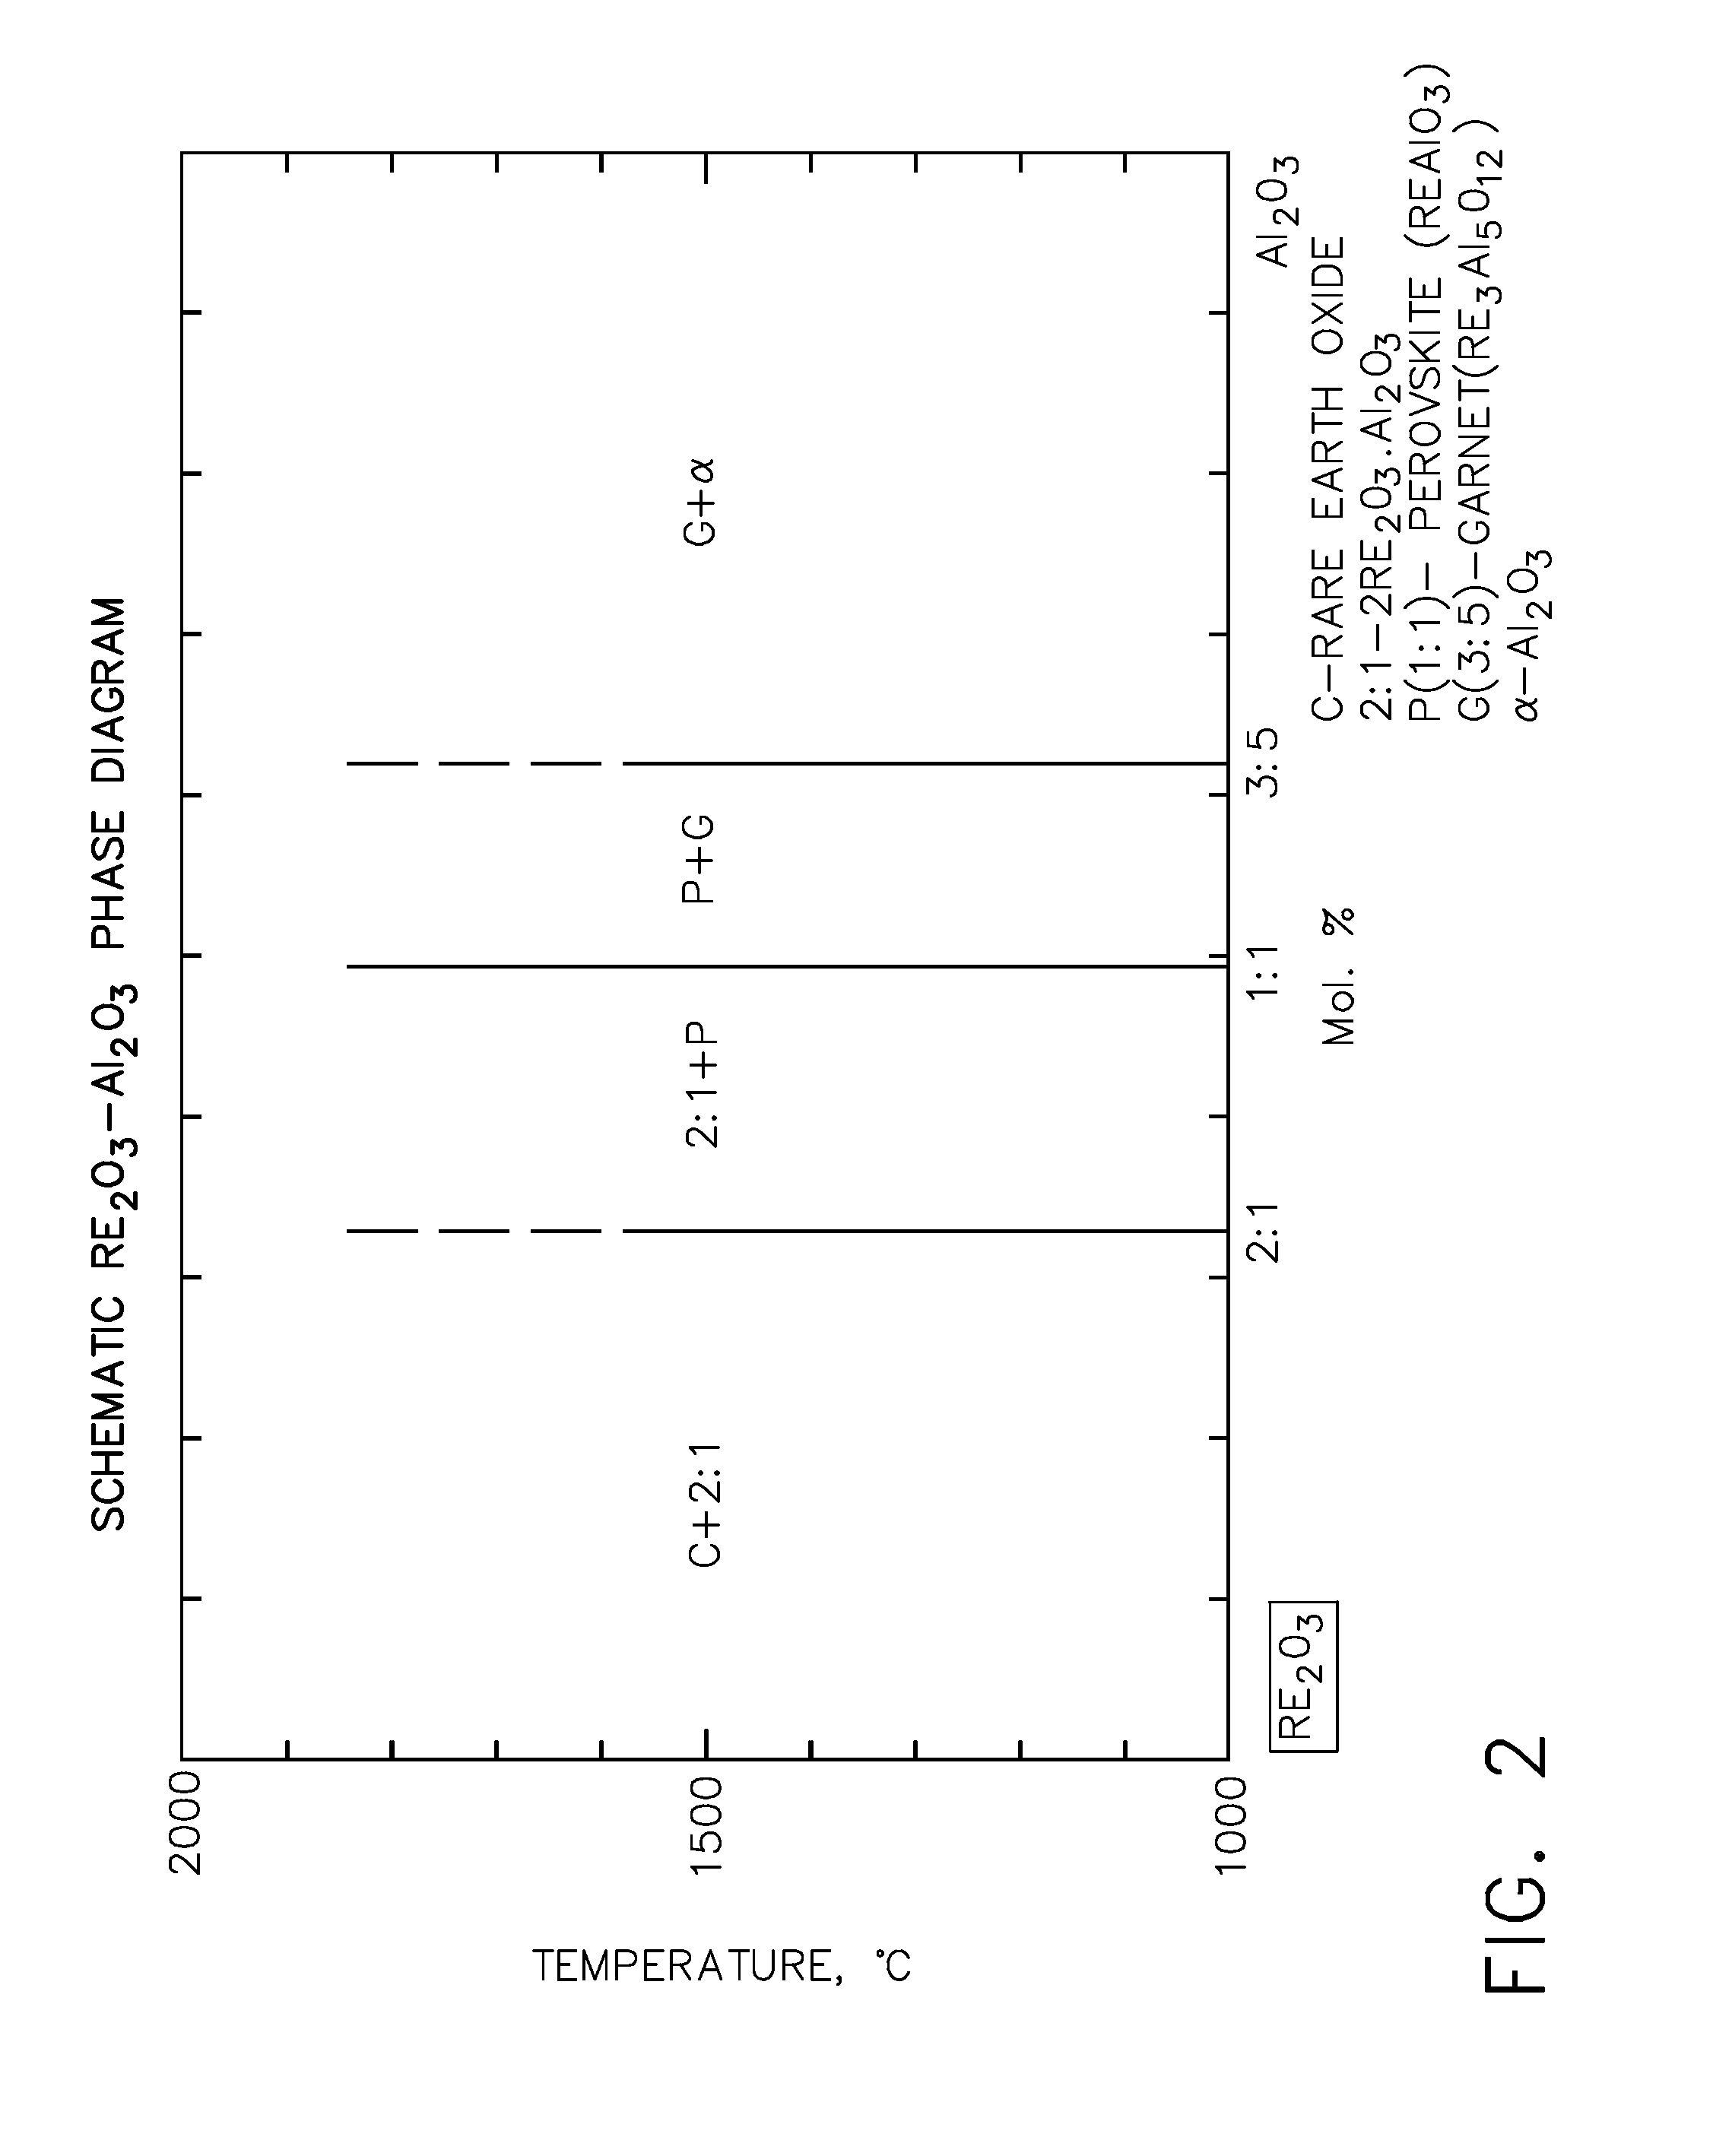 Method for Improving Resistance to CMAS Infiltration